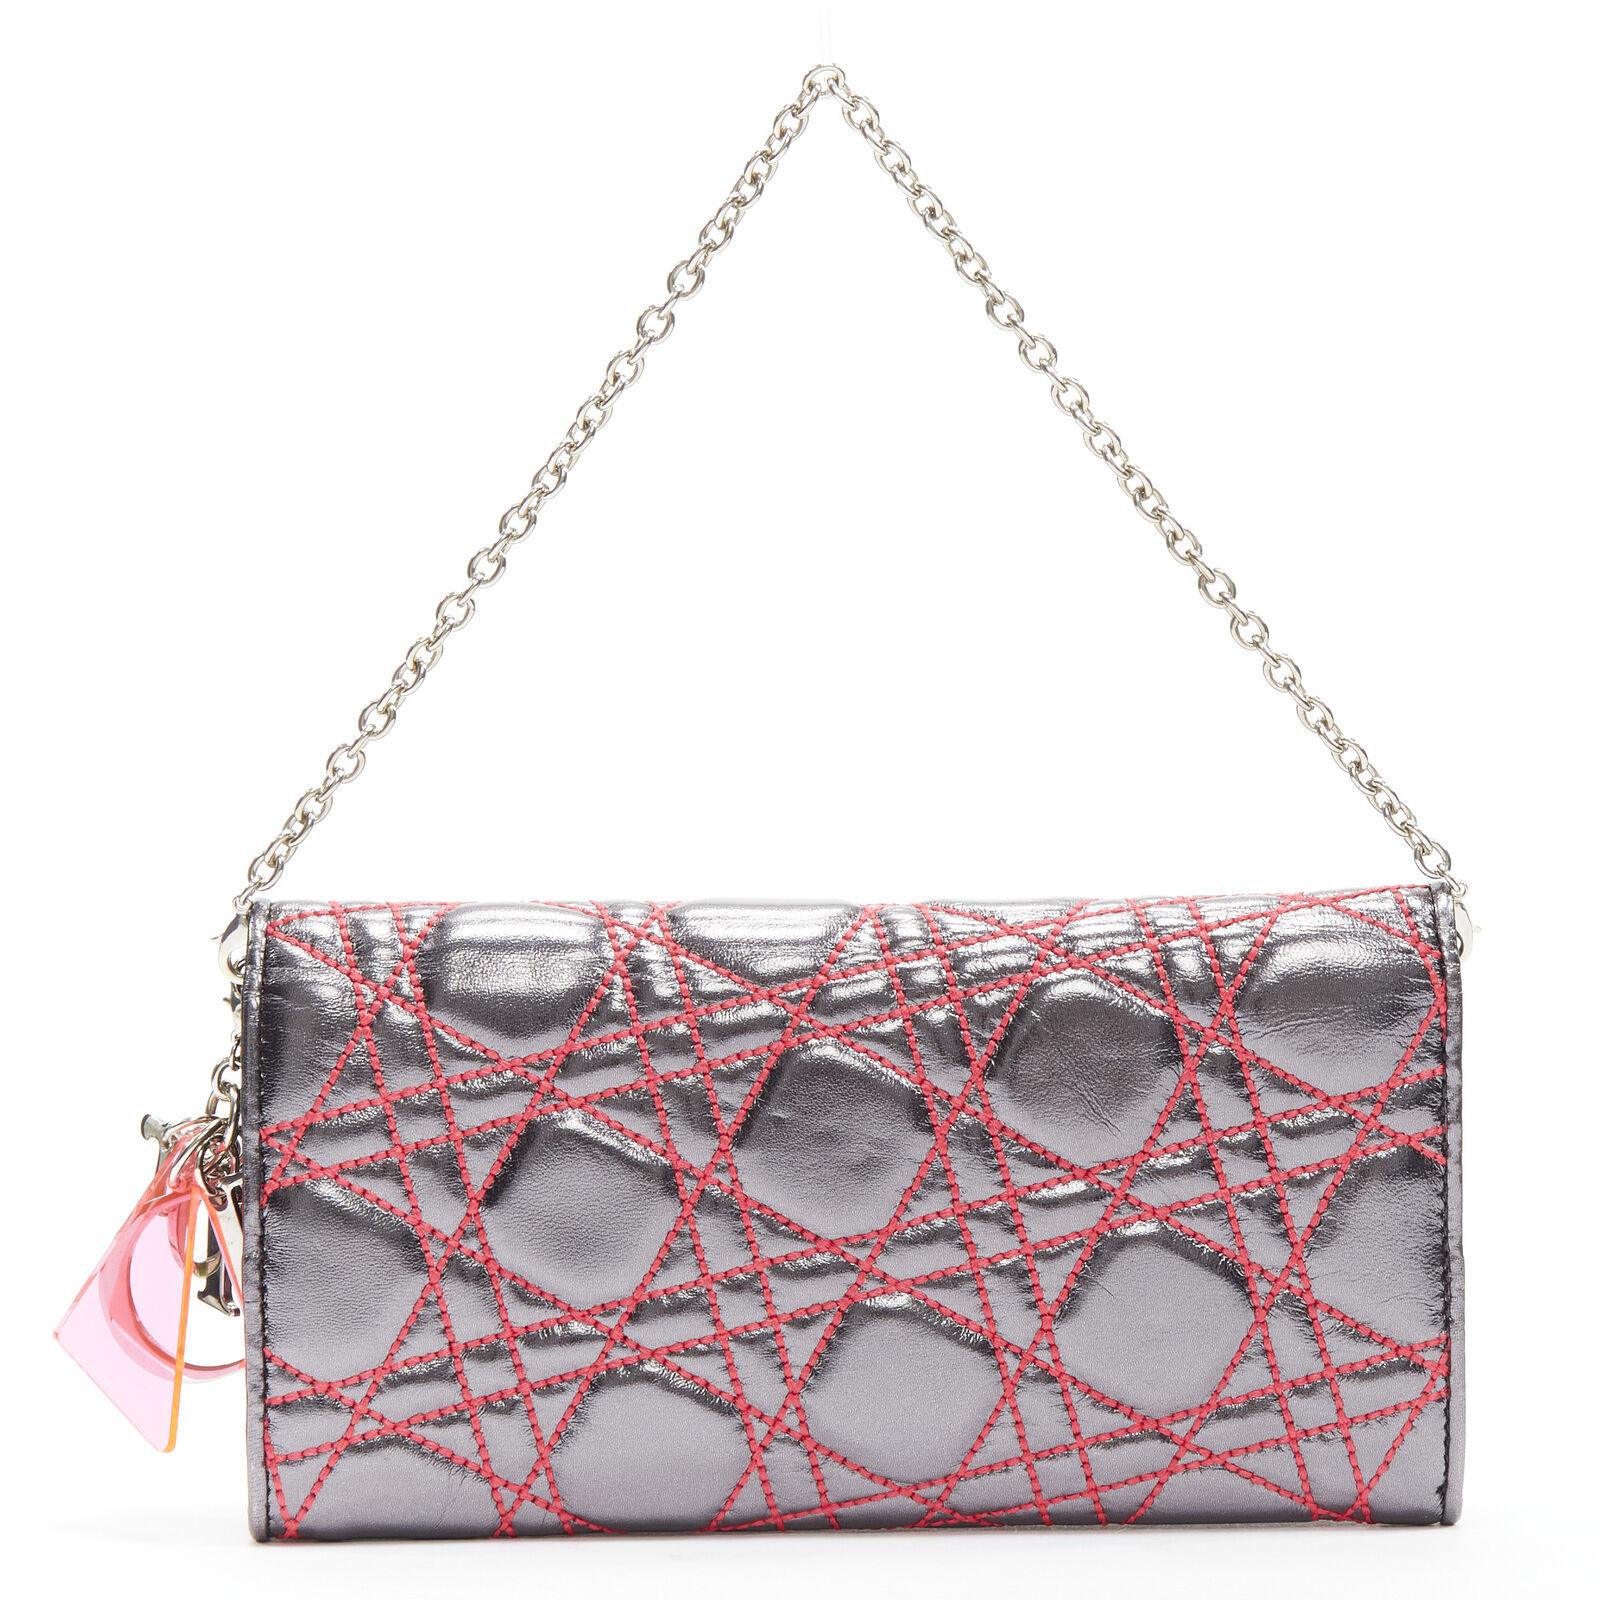 Women's CHRISTIAN DIOR 2011 Anselm Reyle silver neon pink Cannage wallet on chain bag